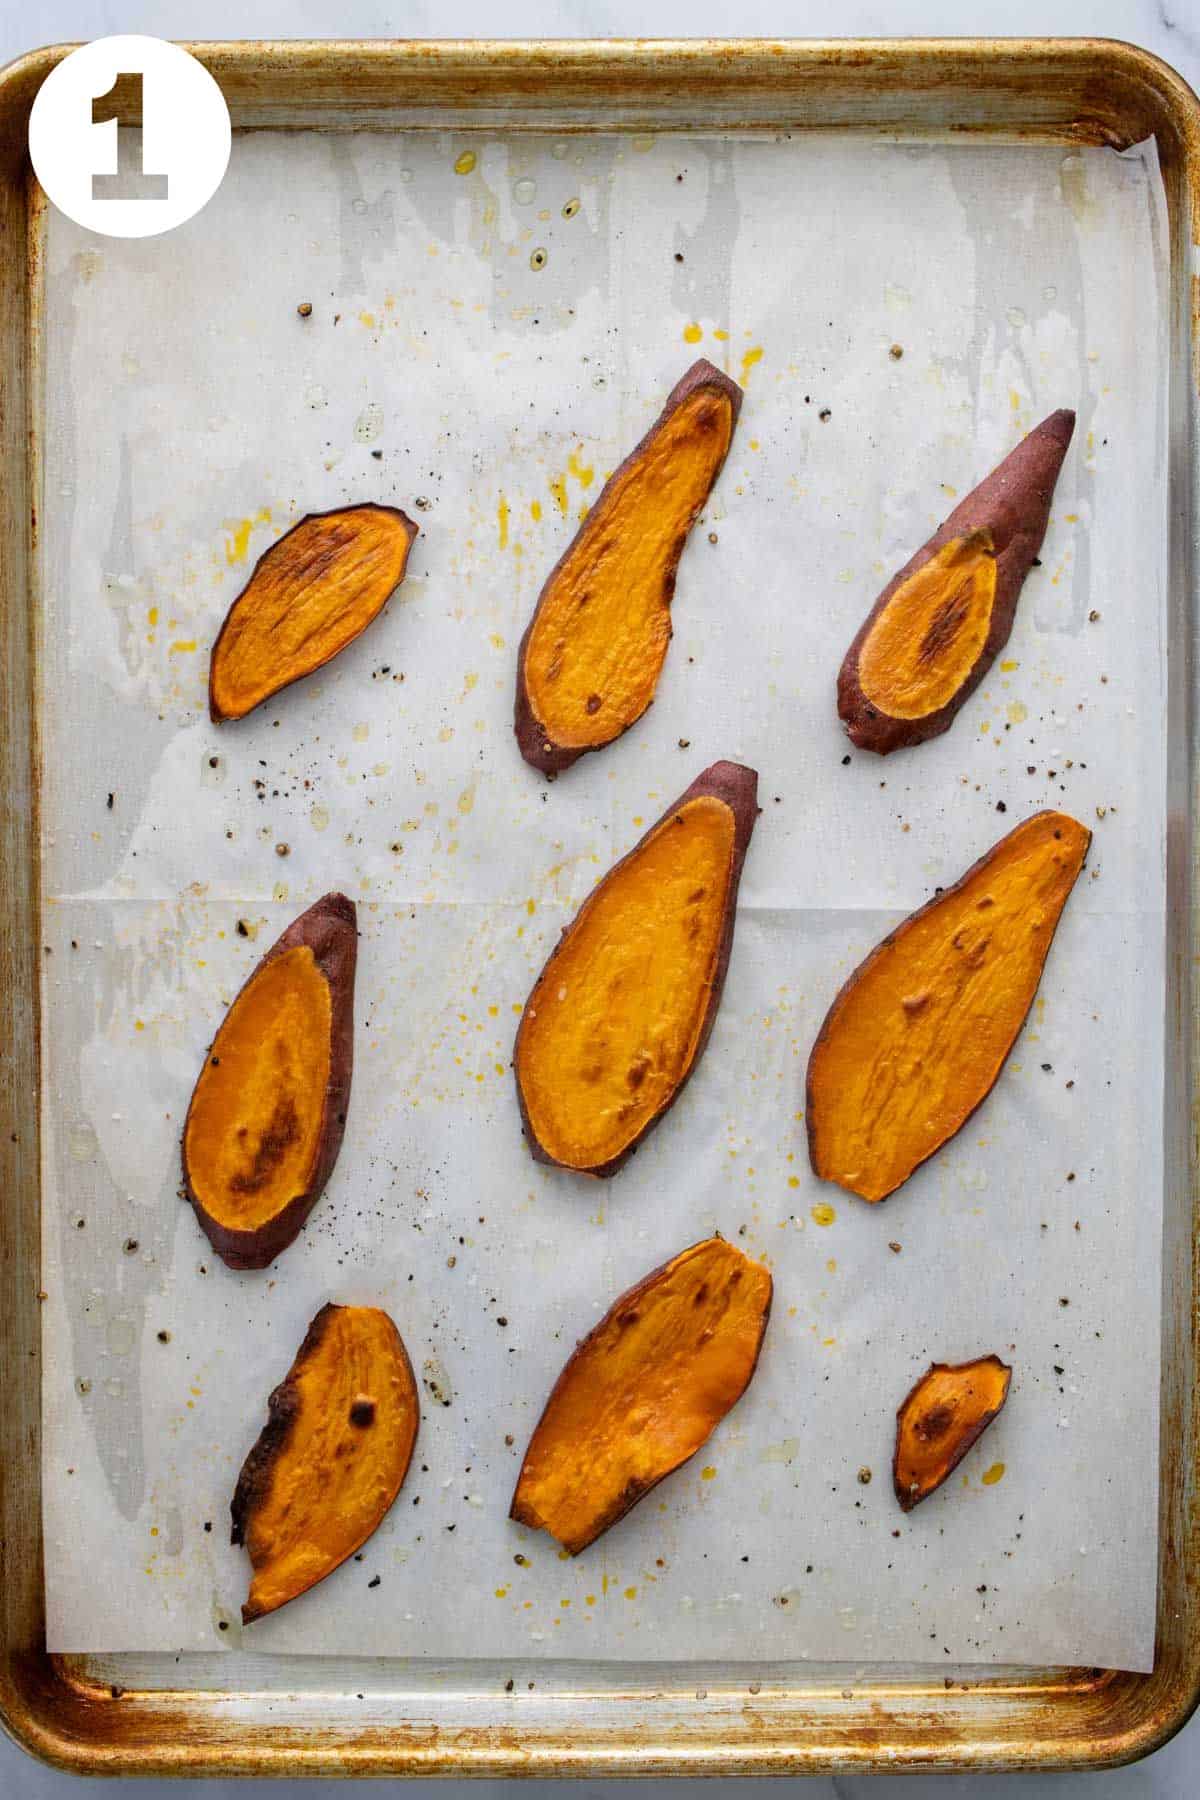 Thinly sliced roasted sweet potato on a baking sheet lined with parchment paper. Labeled 